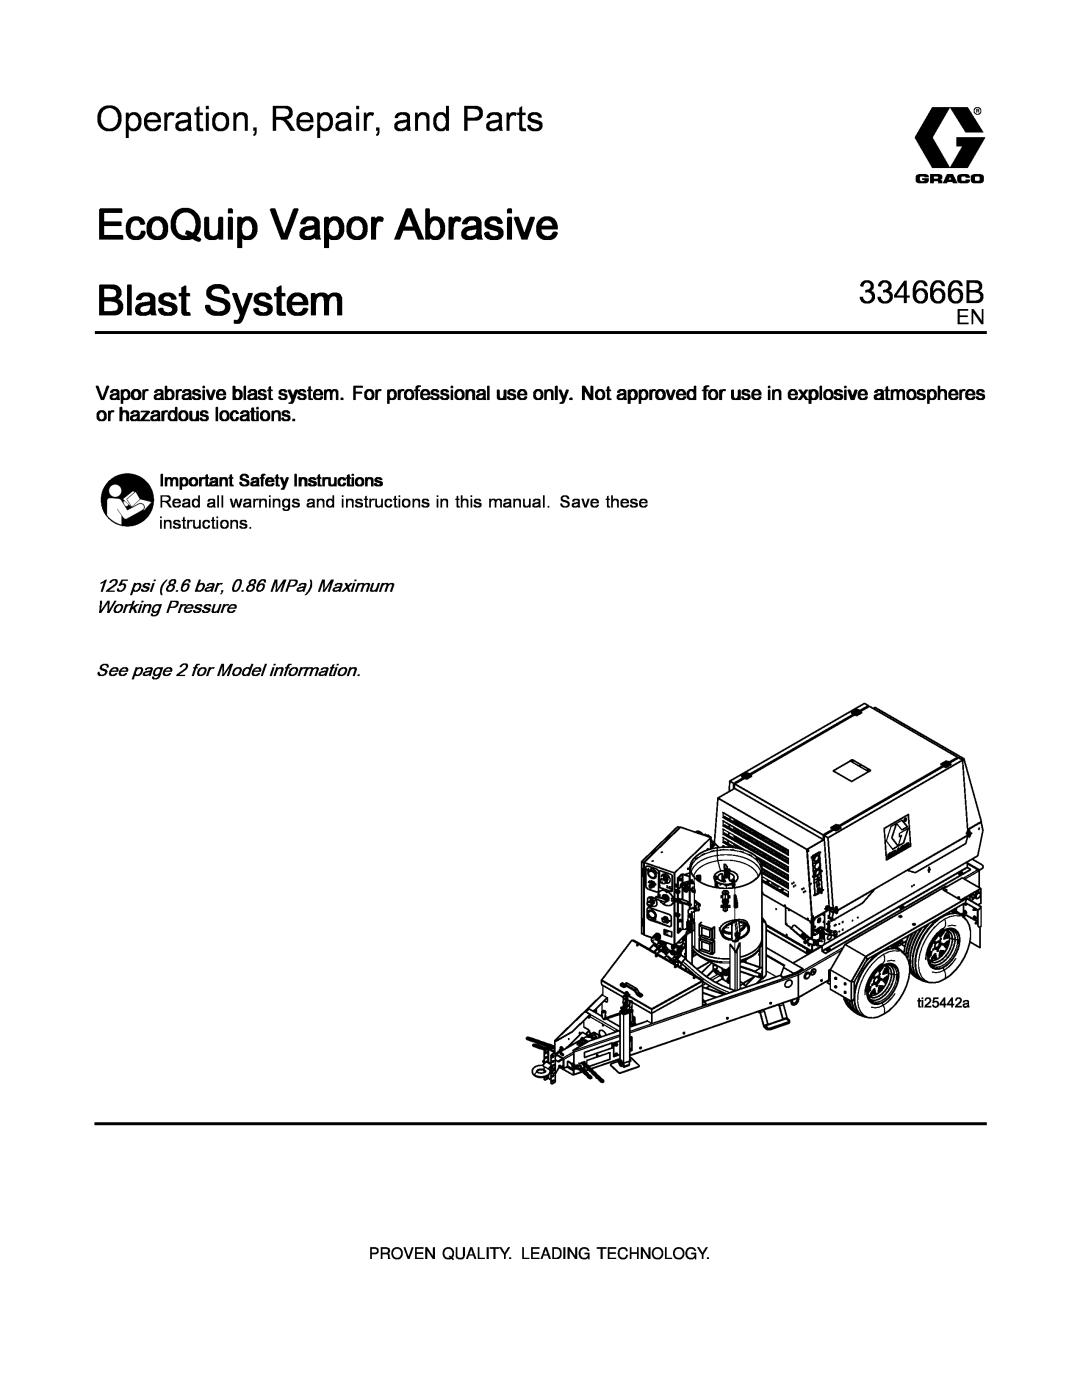 Graco ti25442a manual Important Safety Instructions, See page 2 for Model information, EcoQuip Vapor Abrasive Blast System 